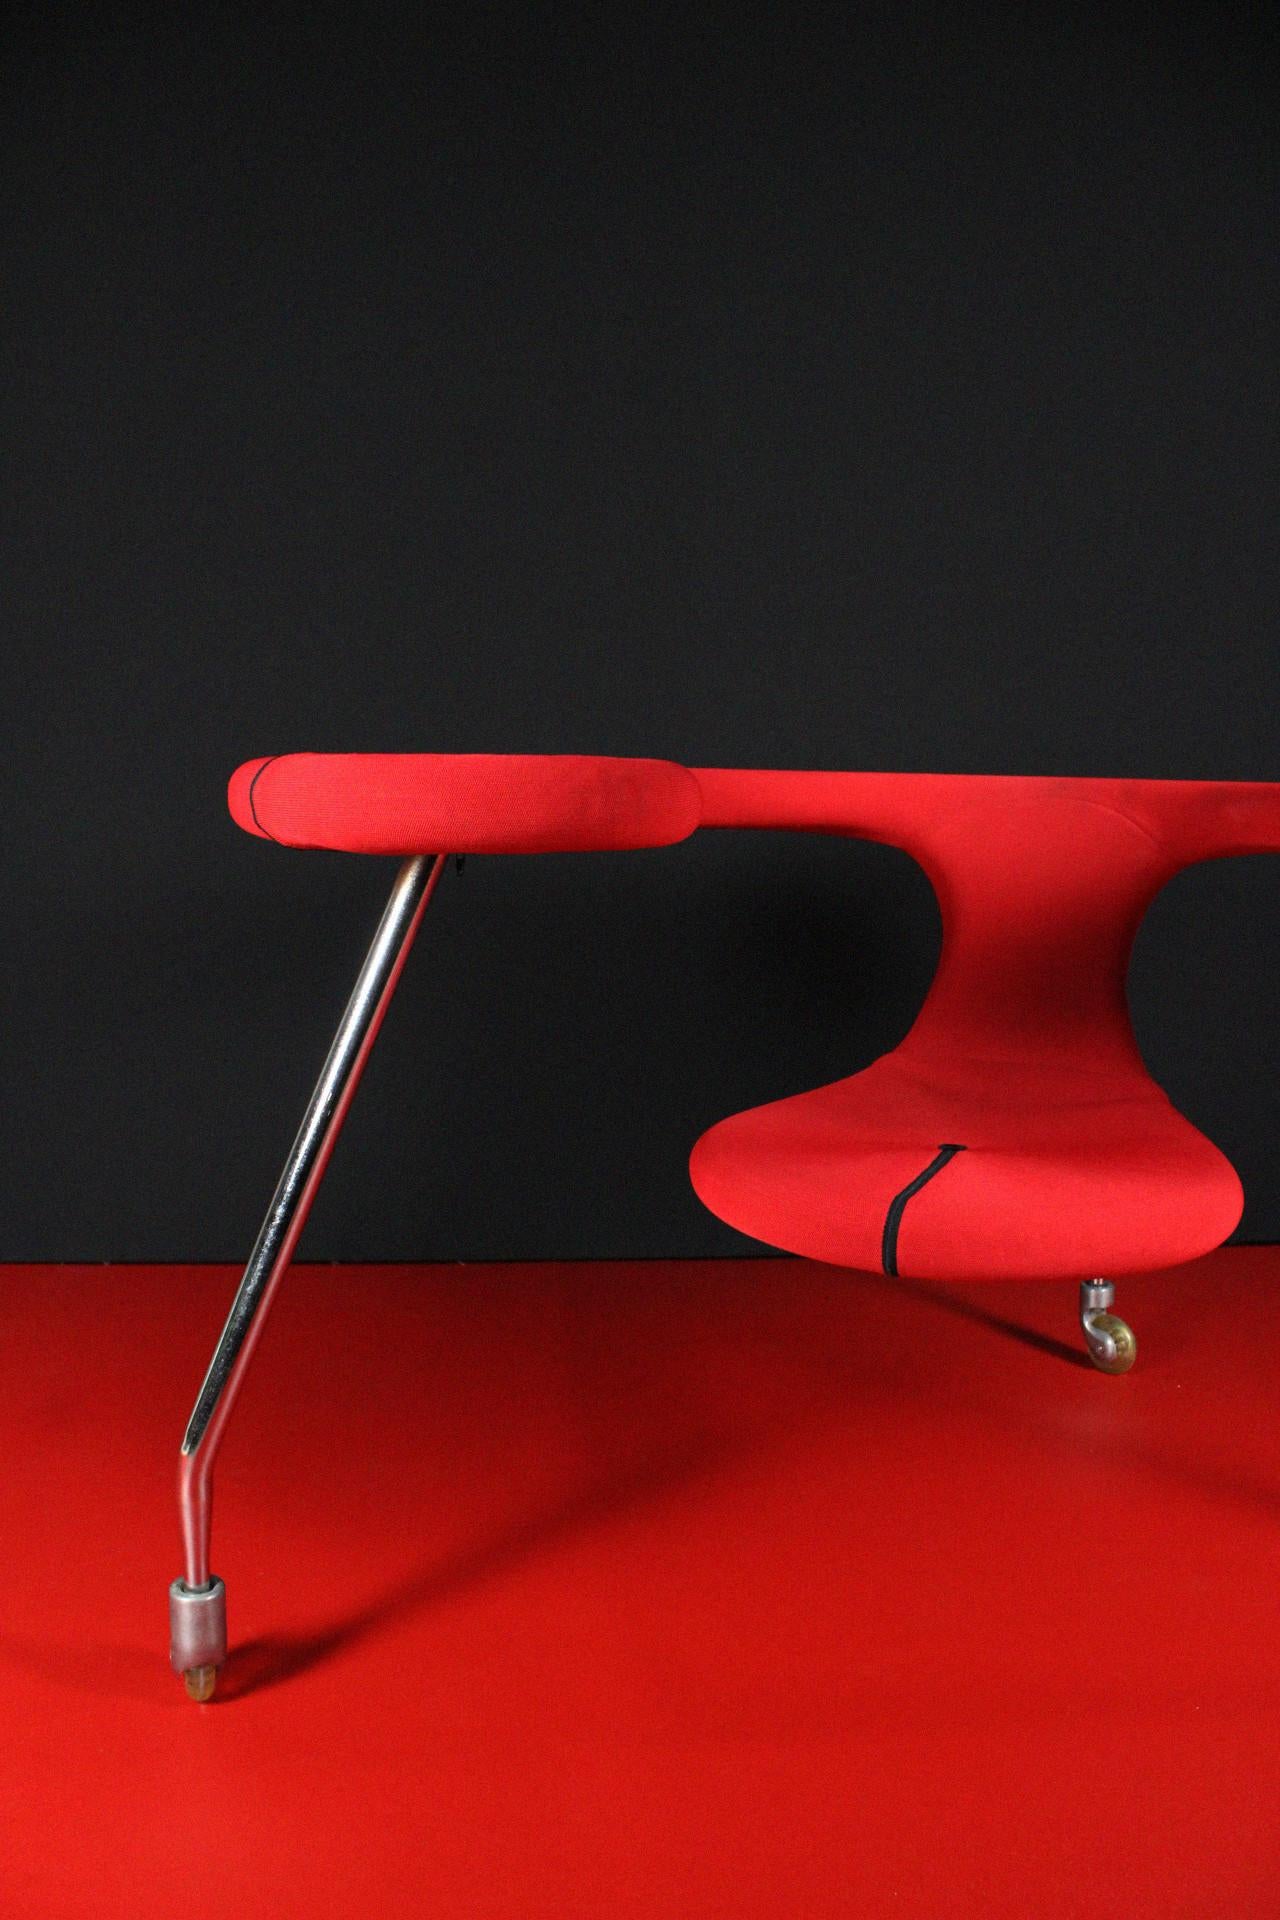 Danny Venlet Bulo Easy Rider Belgium Desk Seat Lounge Space Age Red Chrome In Good Condition For Sale In Antwerpen, BE